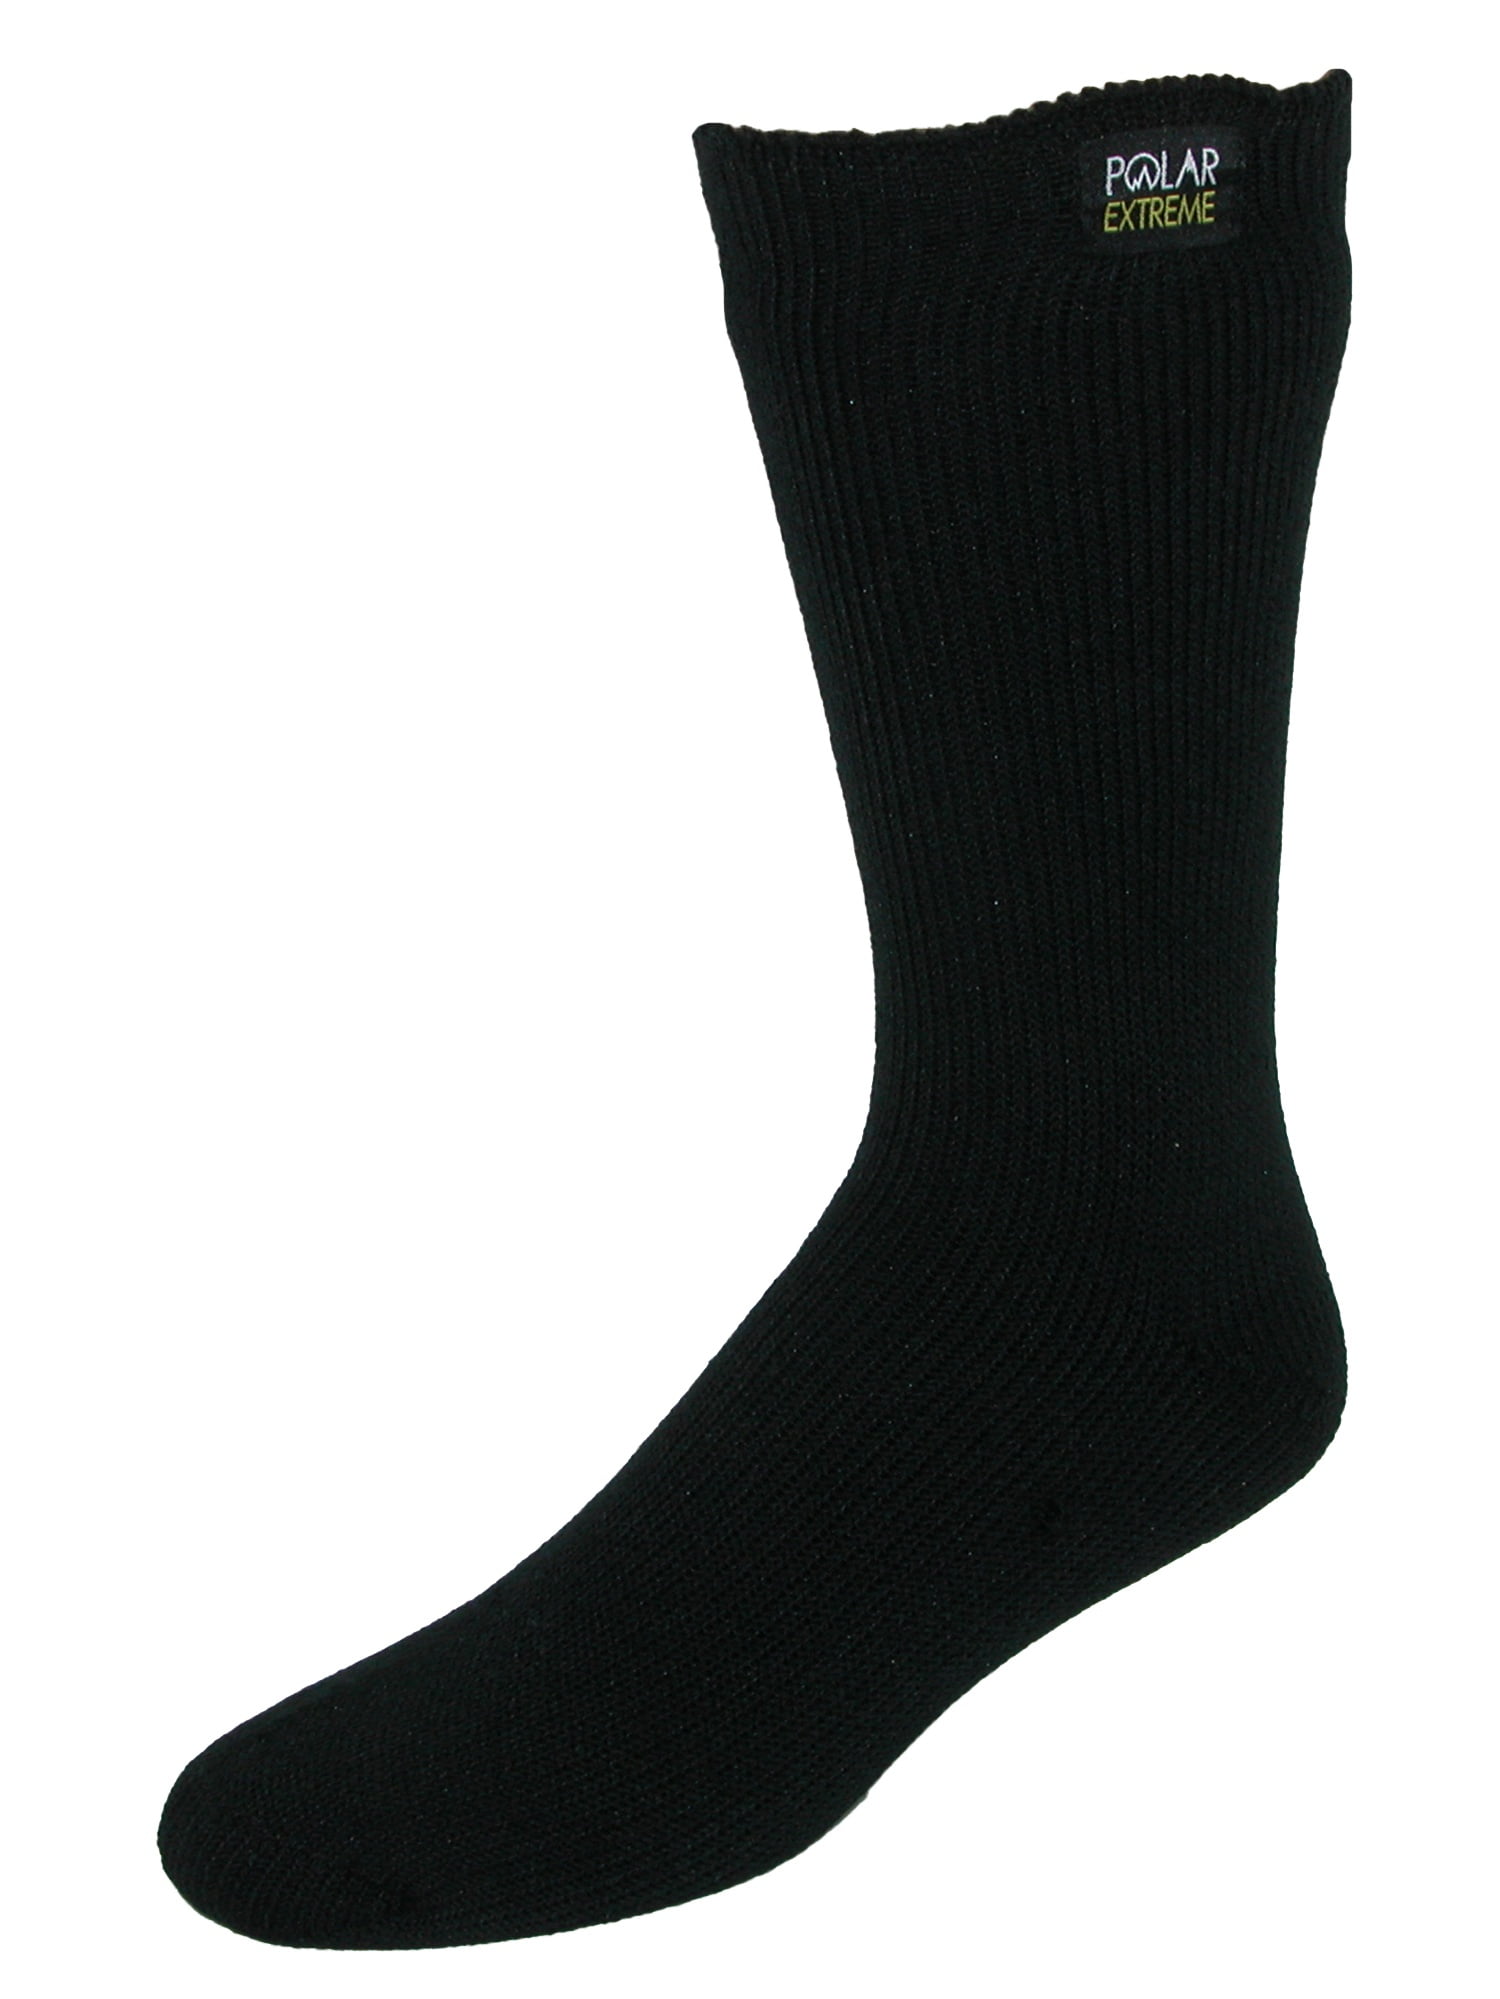 2 Mens Ultimate Thick Hot Winter Warm Thermal Socks Ultimate Heat 2.3 TOG 1 